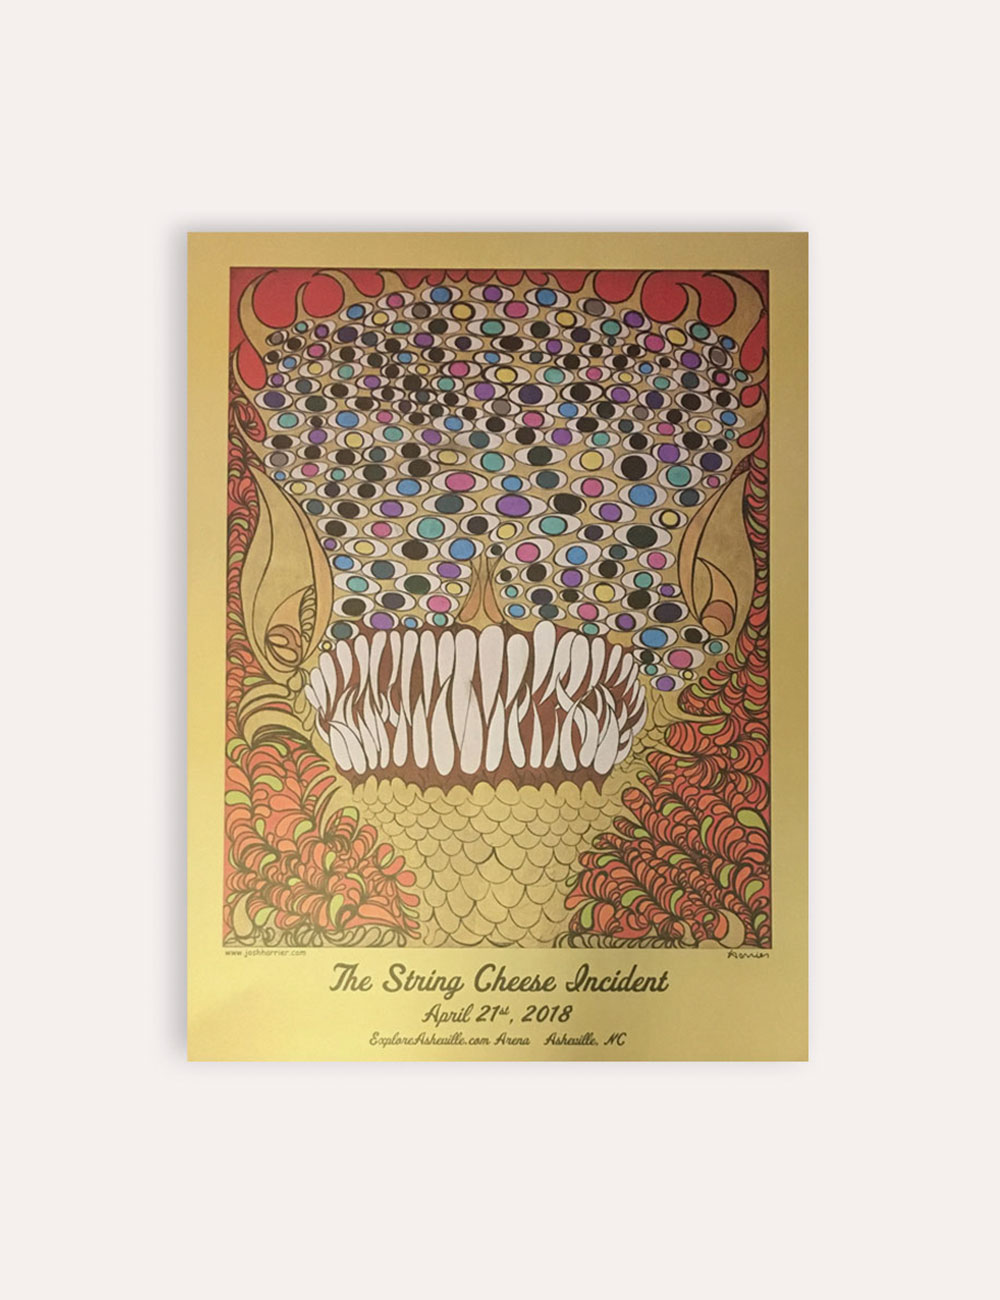 The String Cheese Incident - Merch - Gig Poster - 2018 Asheville, NC Poster